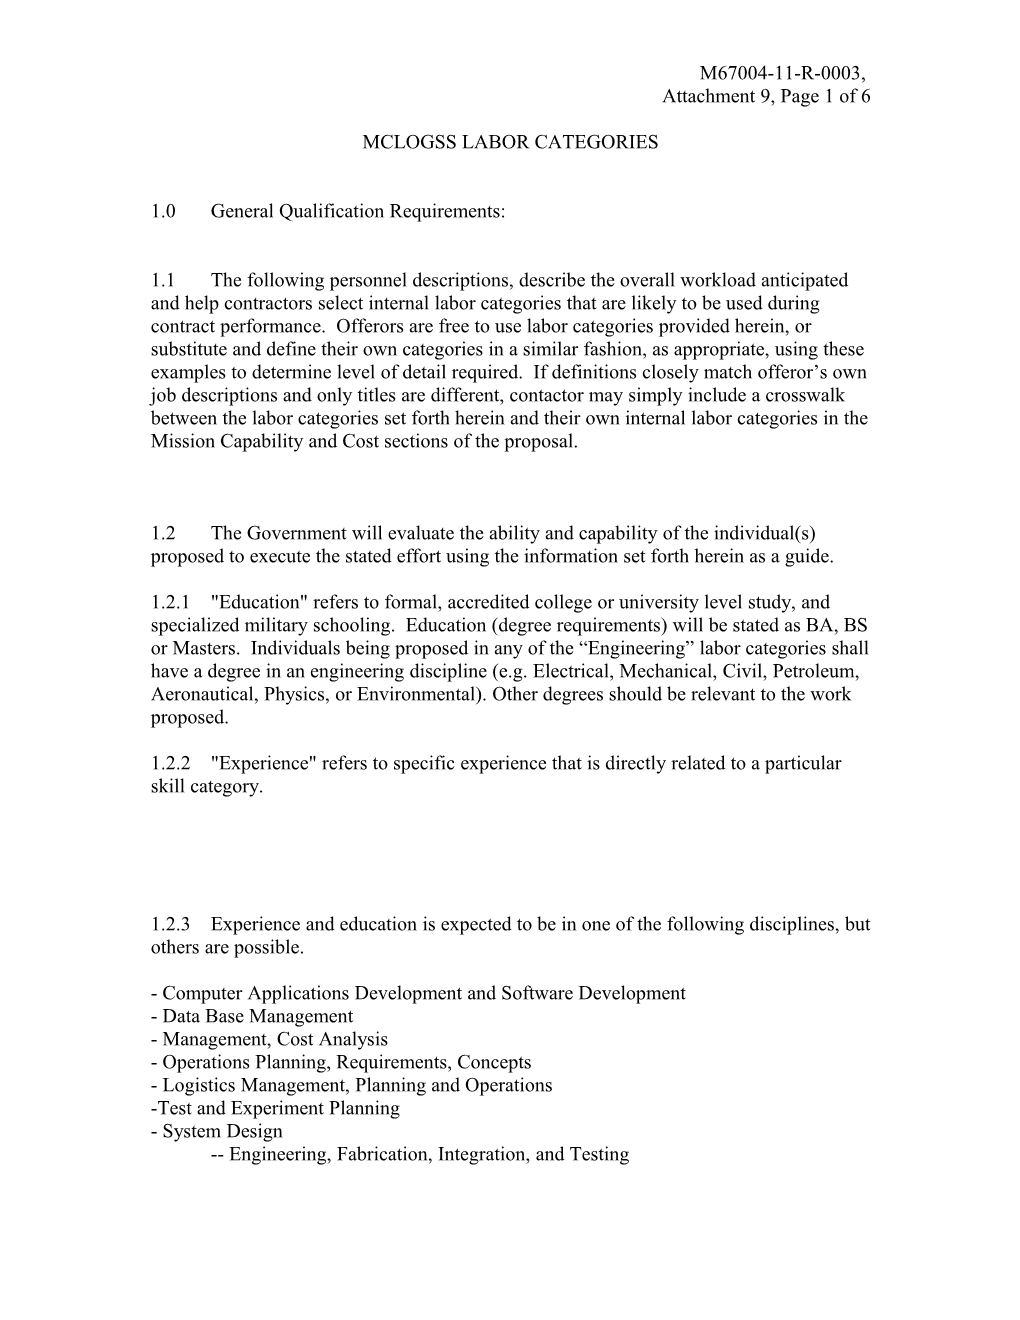 Attachment 9, Page 1 of 6